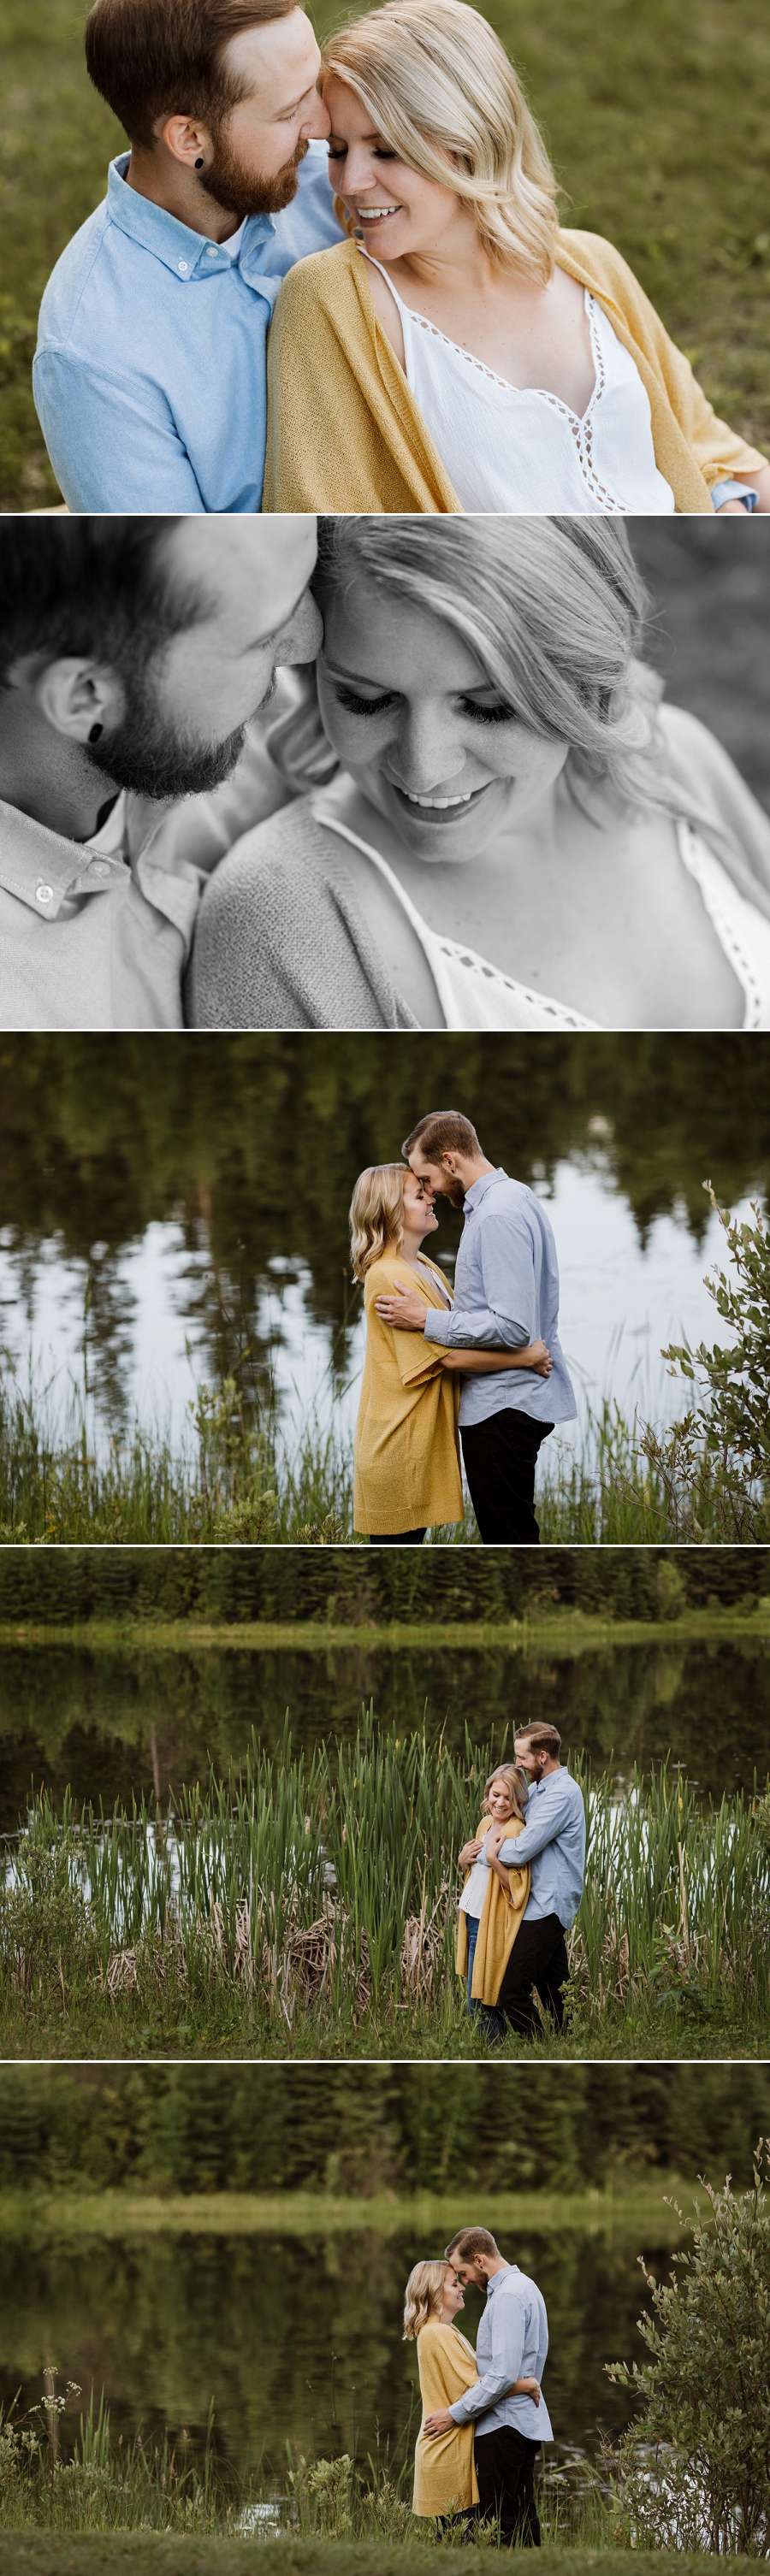 candle lake trout pond engagement session